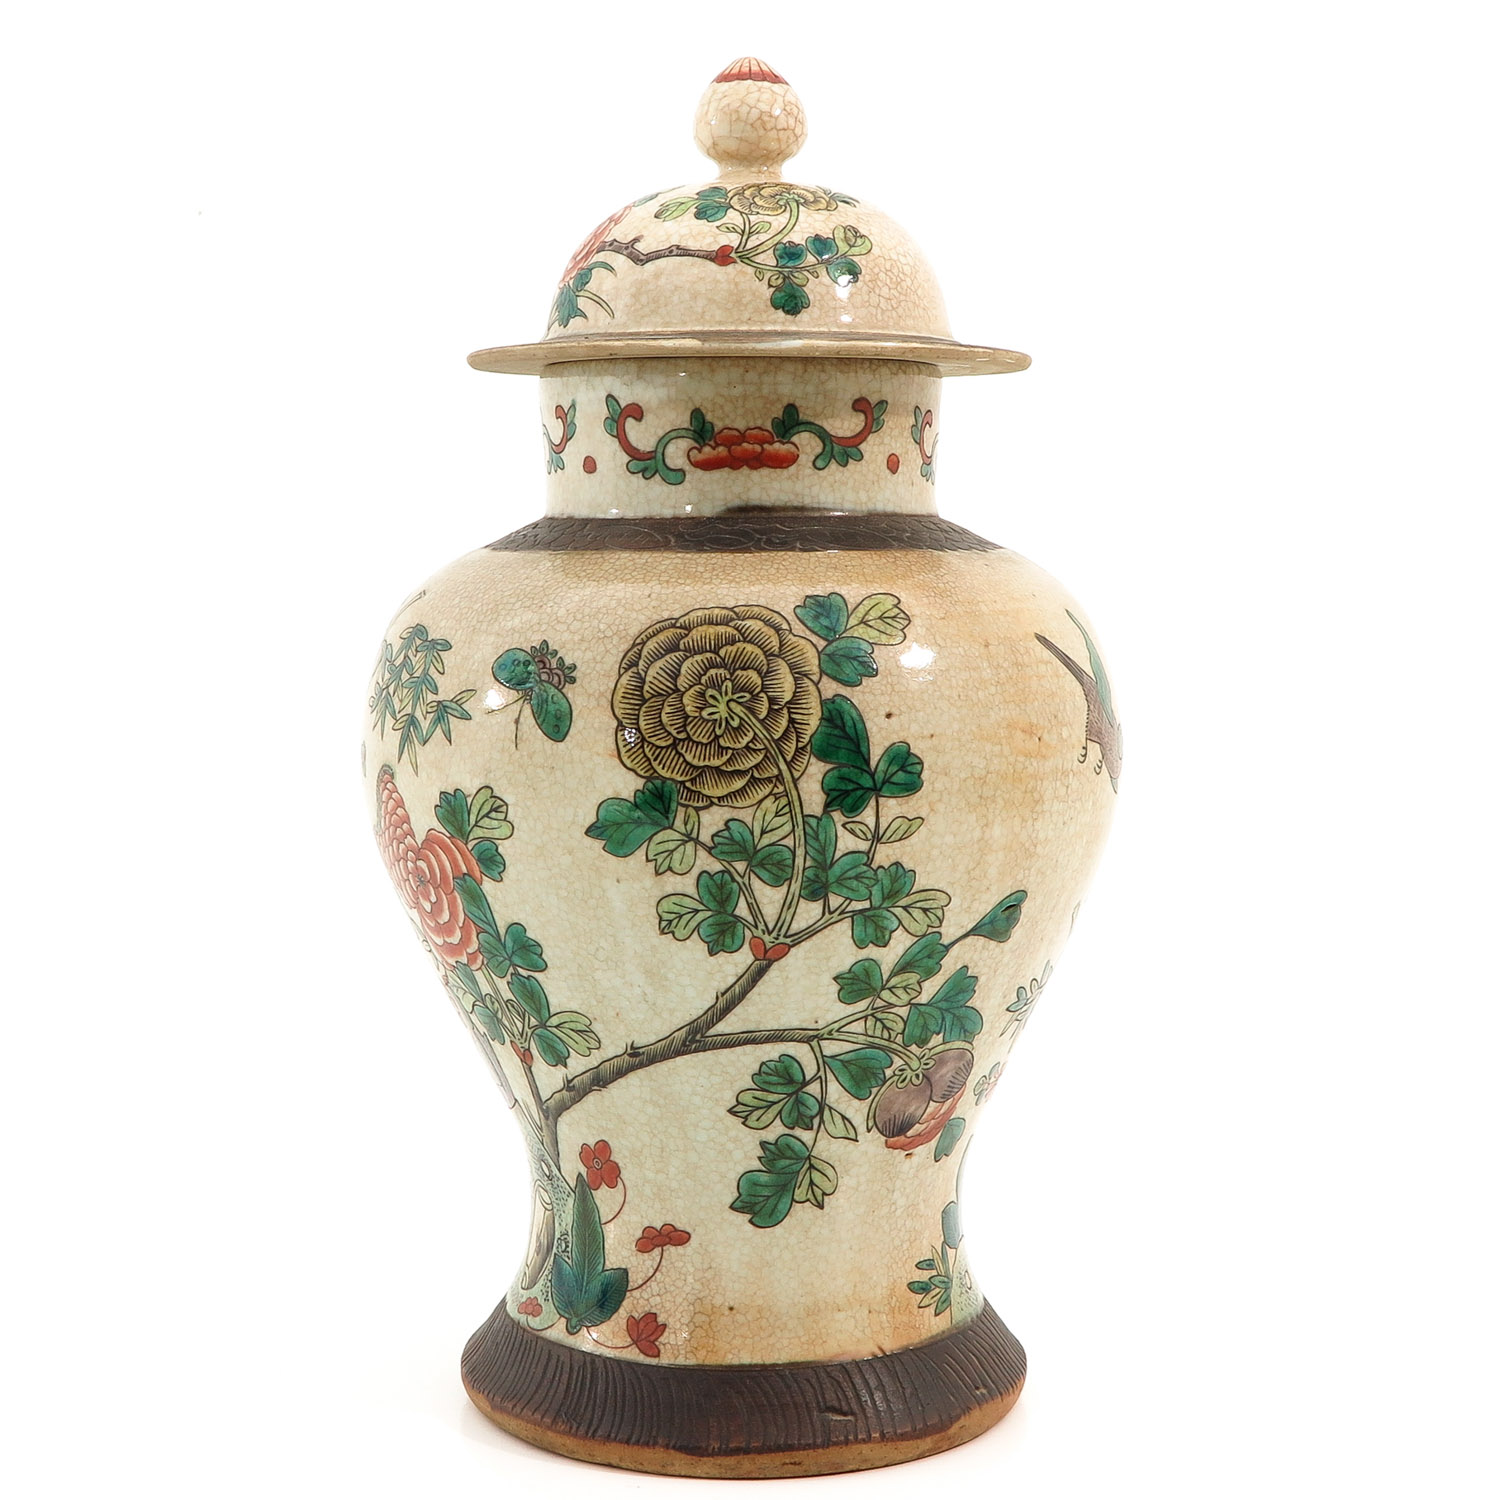 A Nanking Jar with Cover - Image 2 of 10